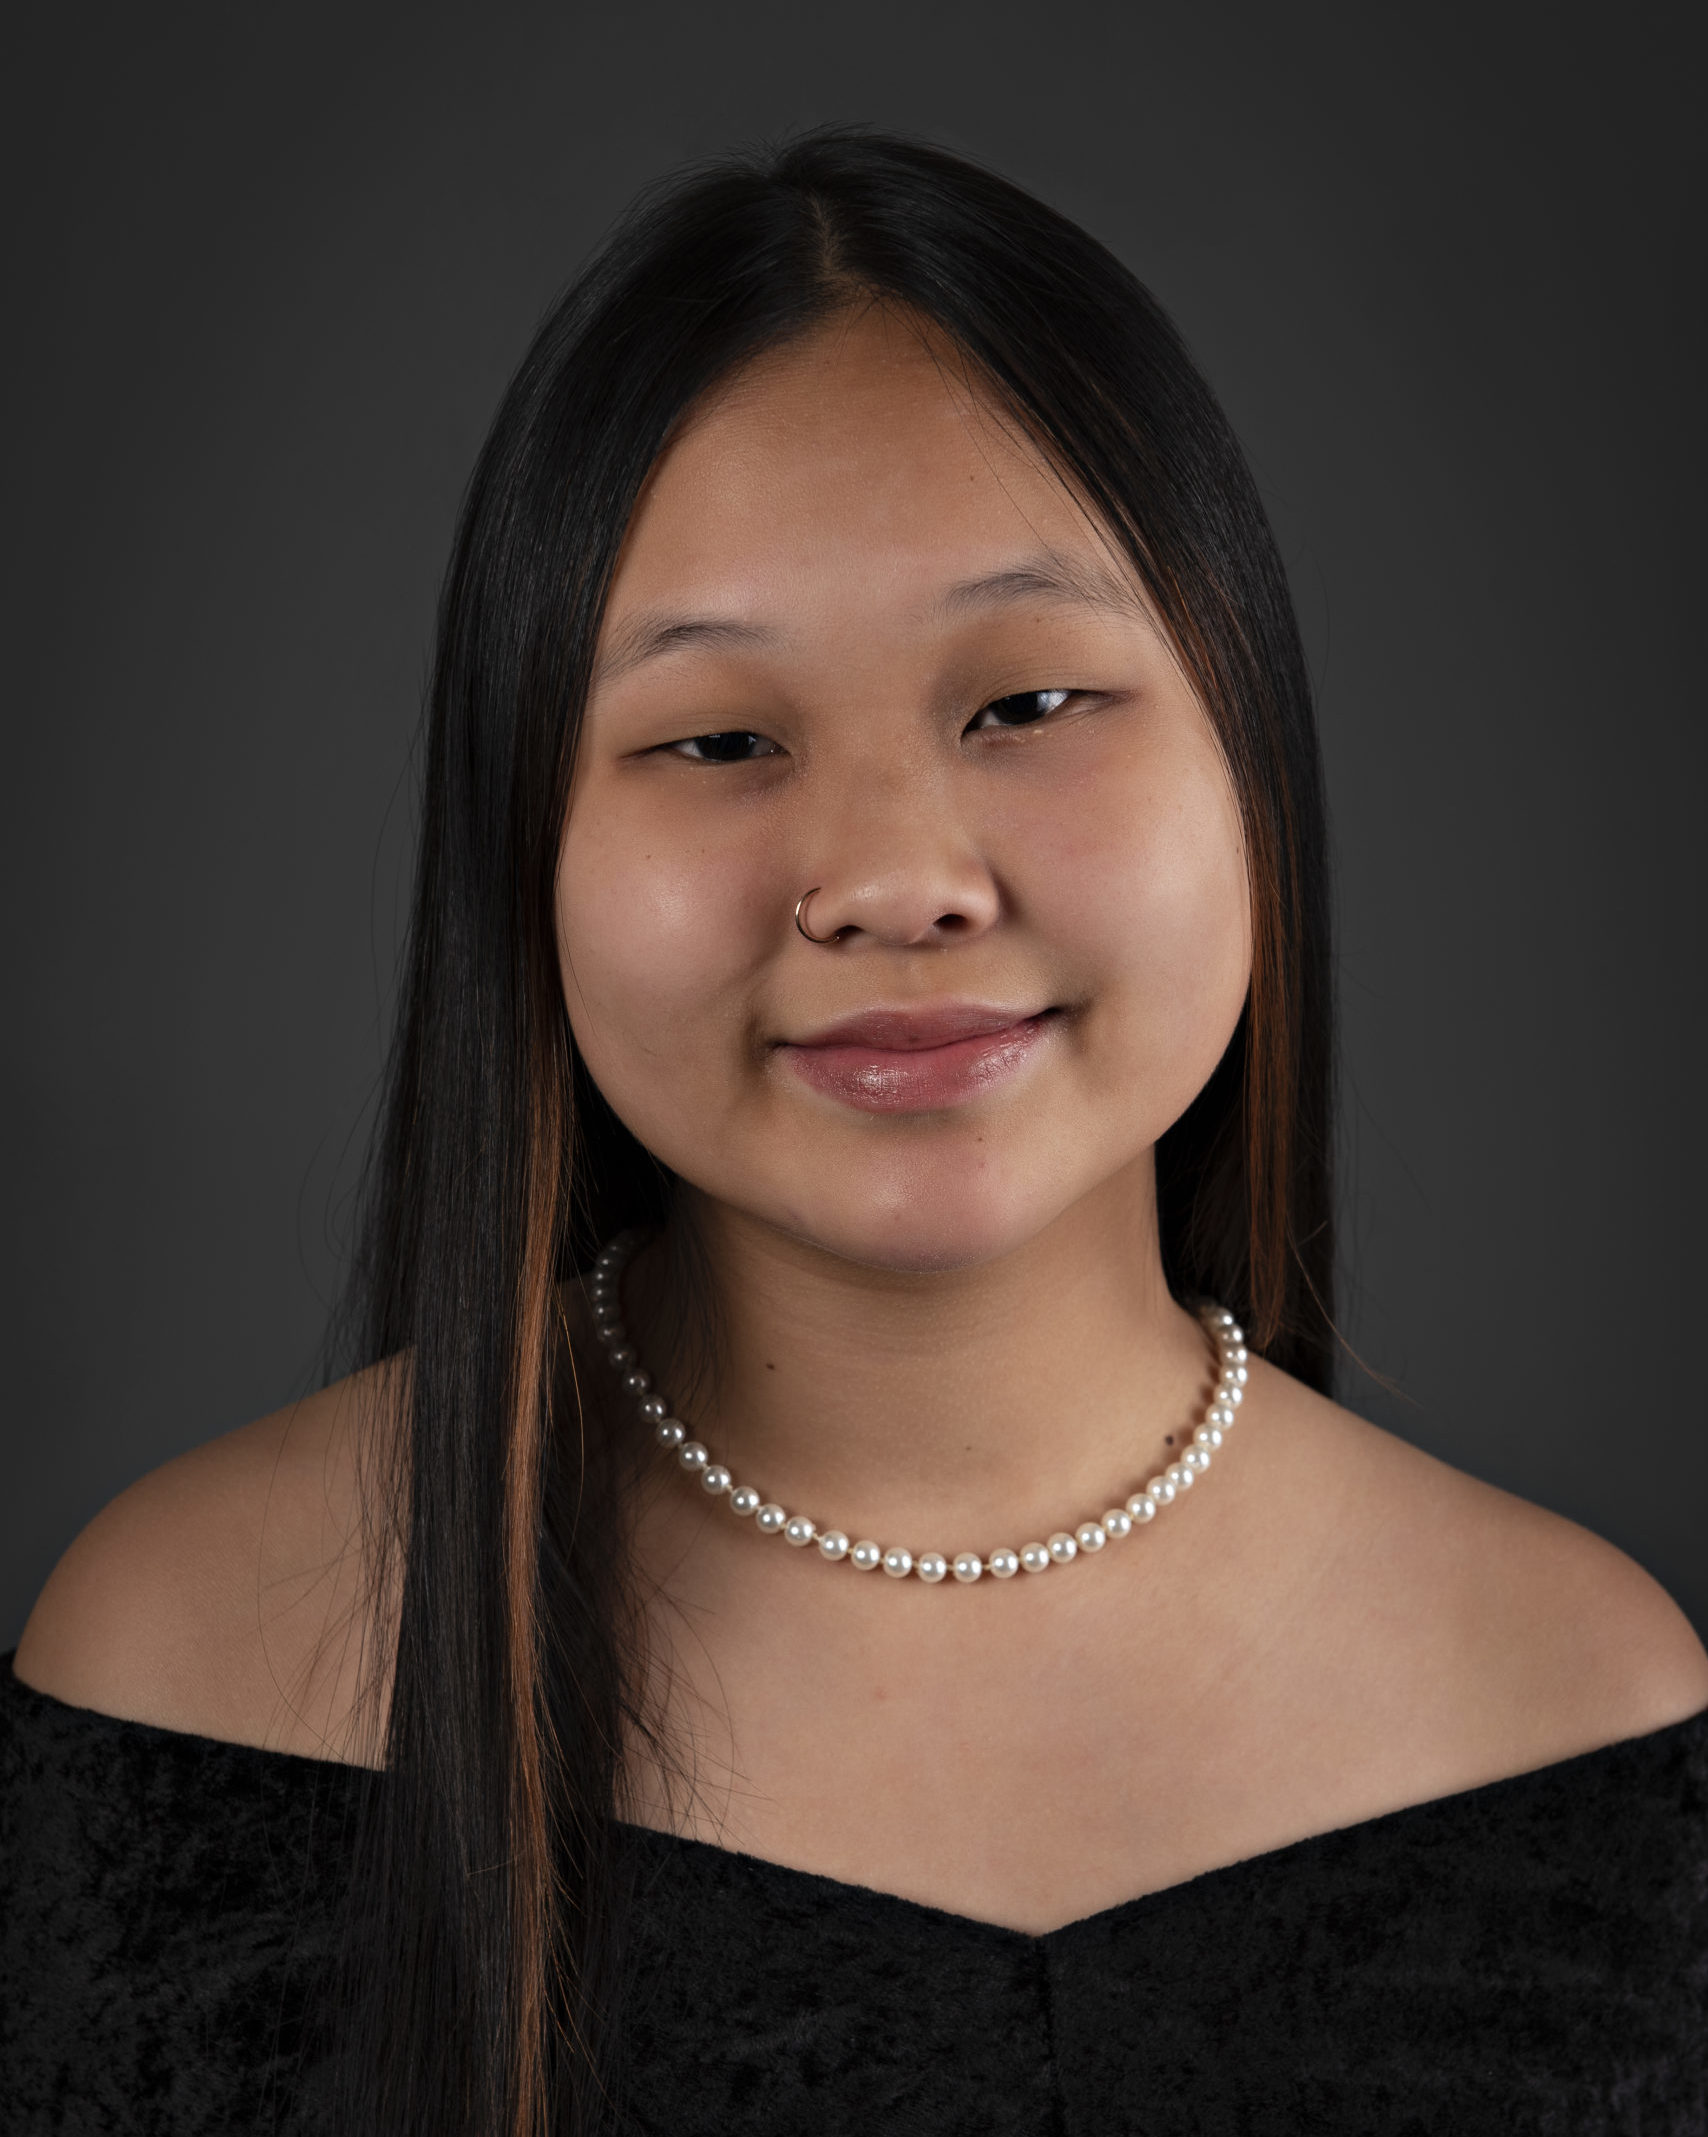 school photo of smiling girl wearing black off the shoulder top and pearl necklace